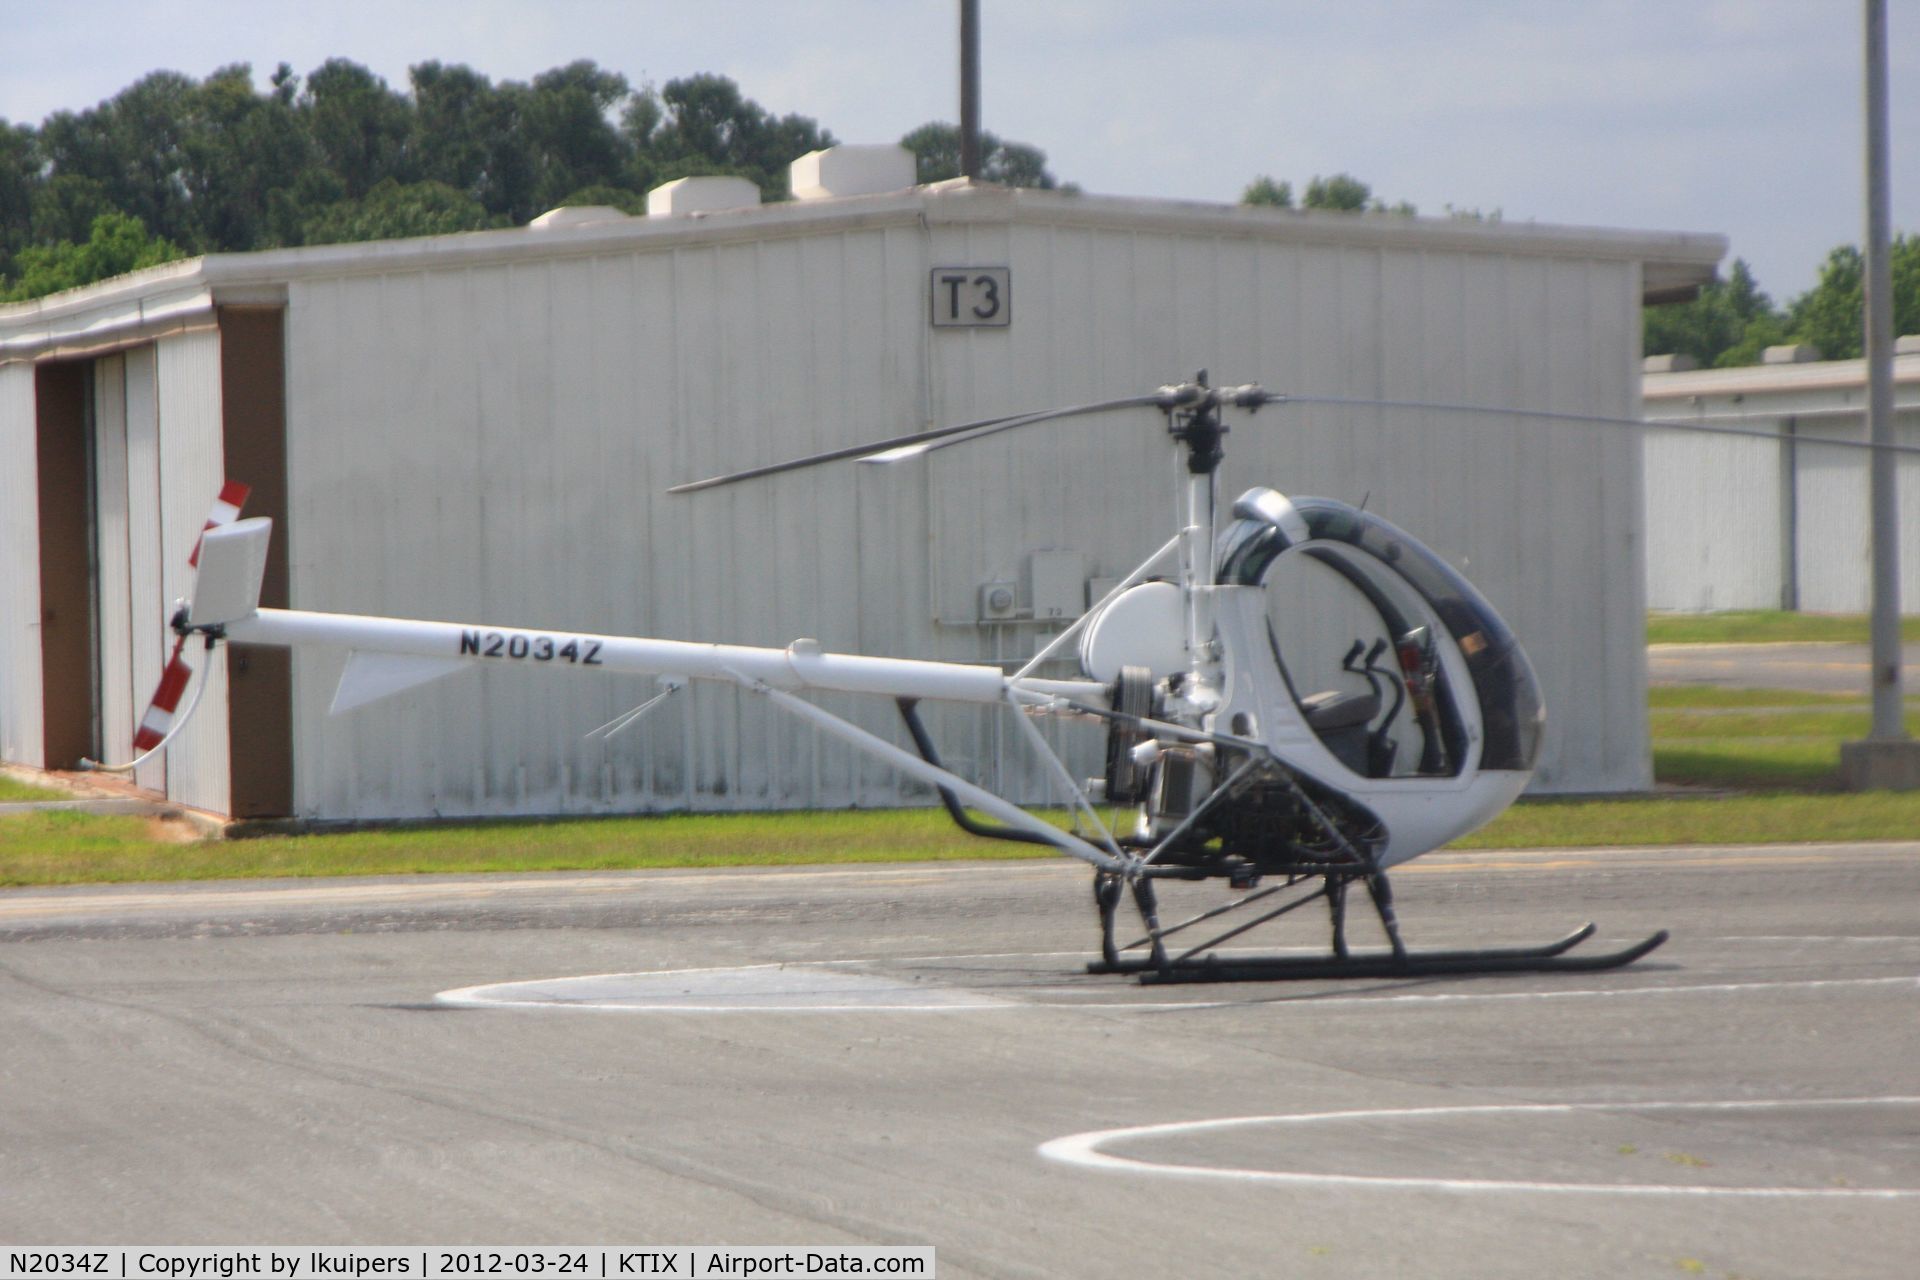 N2034Z, 2008 Schweizer 269C-1 C/N 0327, At Titusville airport, one of the many....